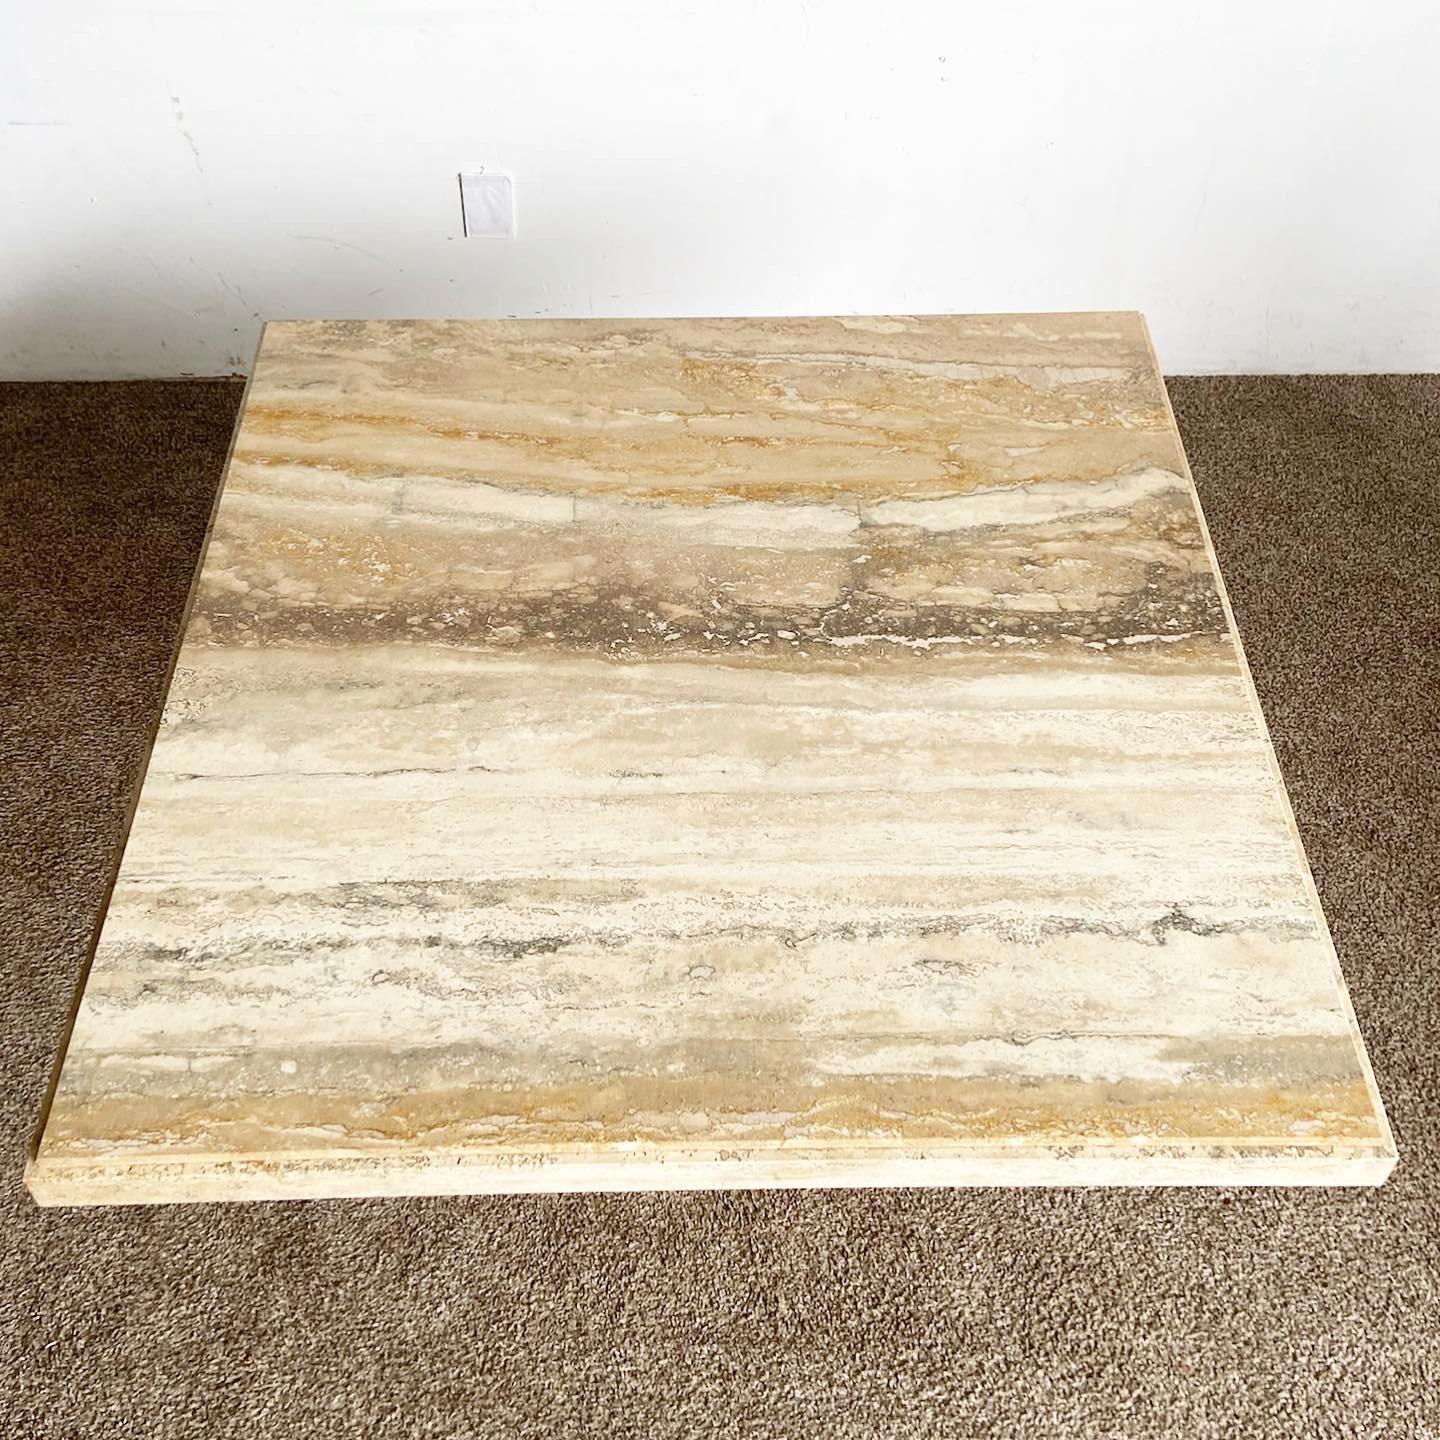 Late 20th Century Italian Dark Travertine State Top Dining Table With Sculpted Pedestal Base